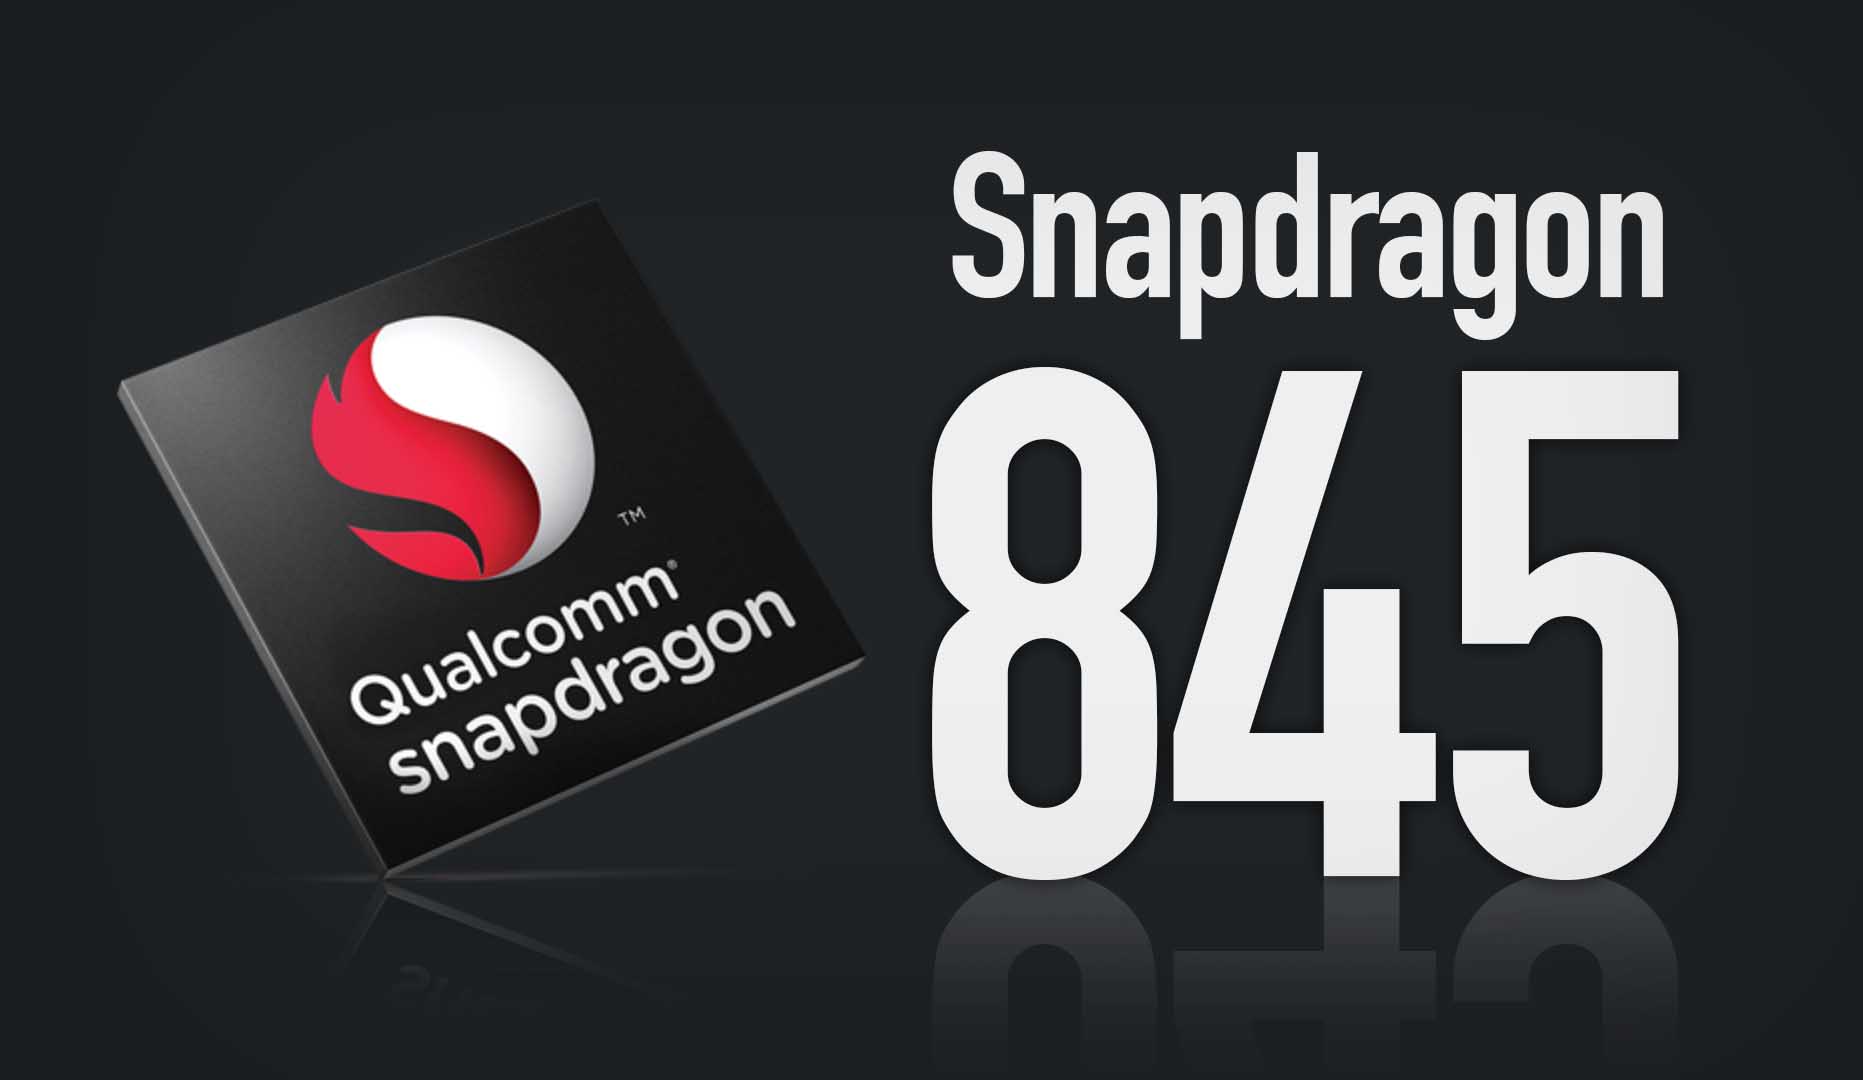 Qualcomm Snapdragon 845 officially presented